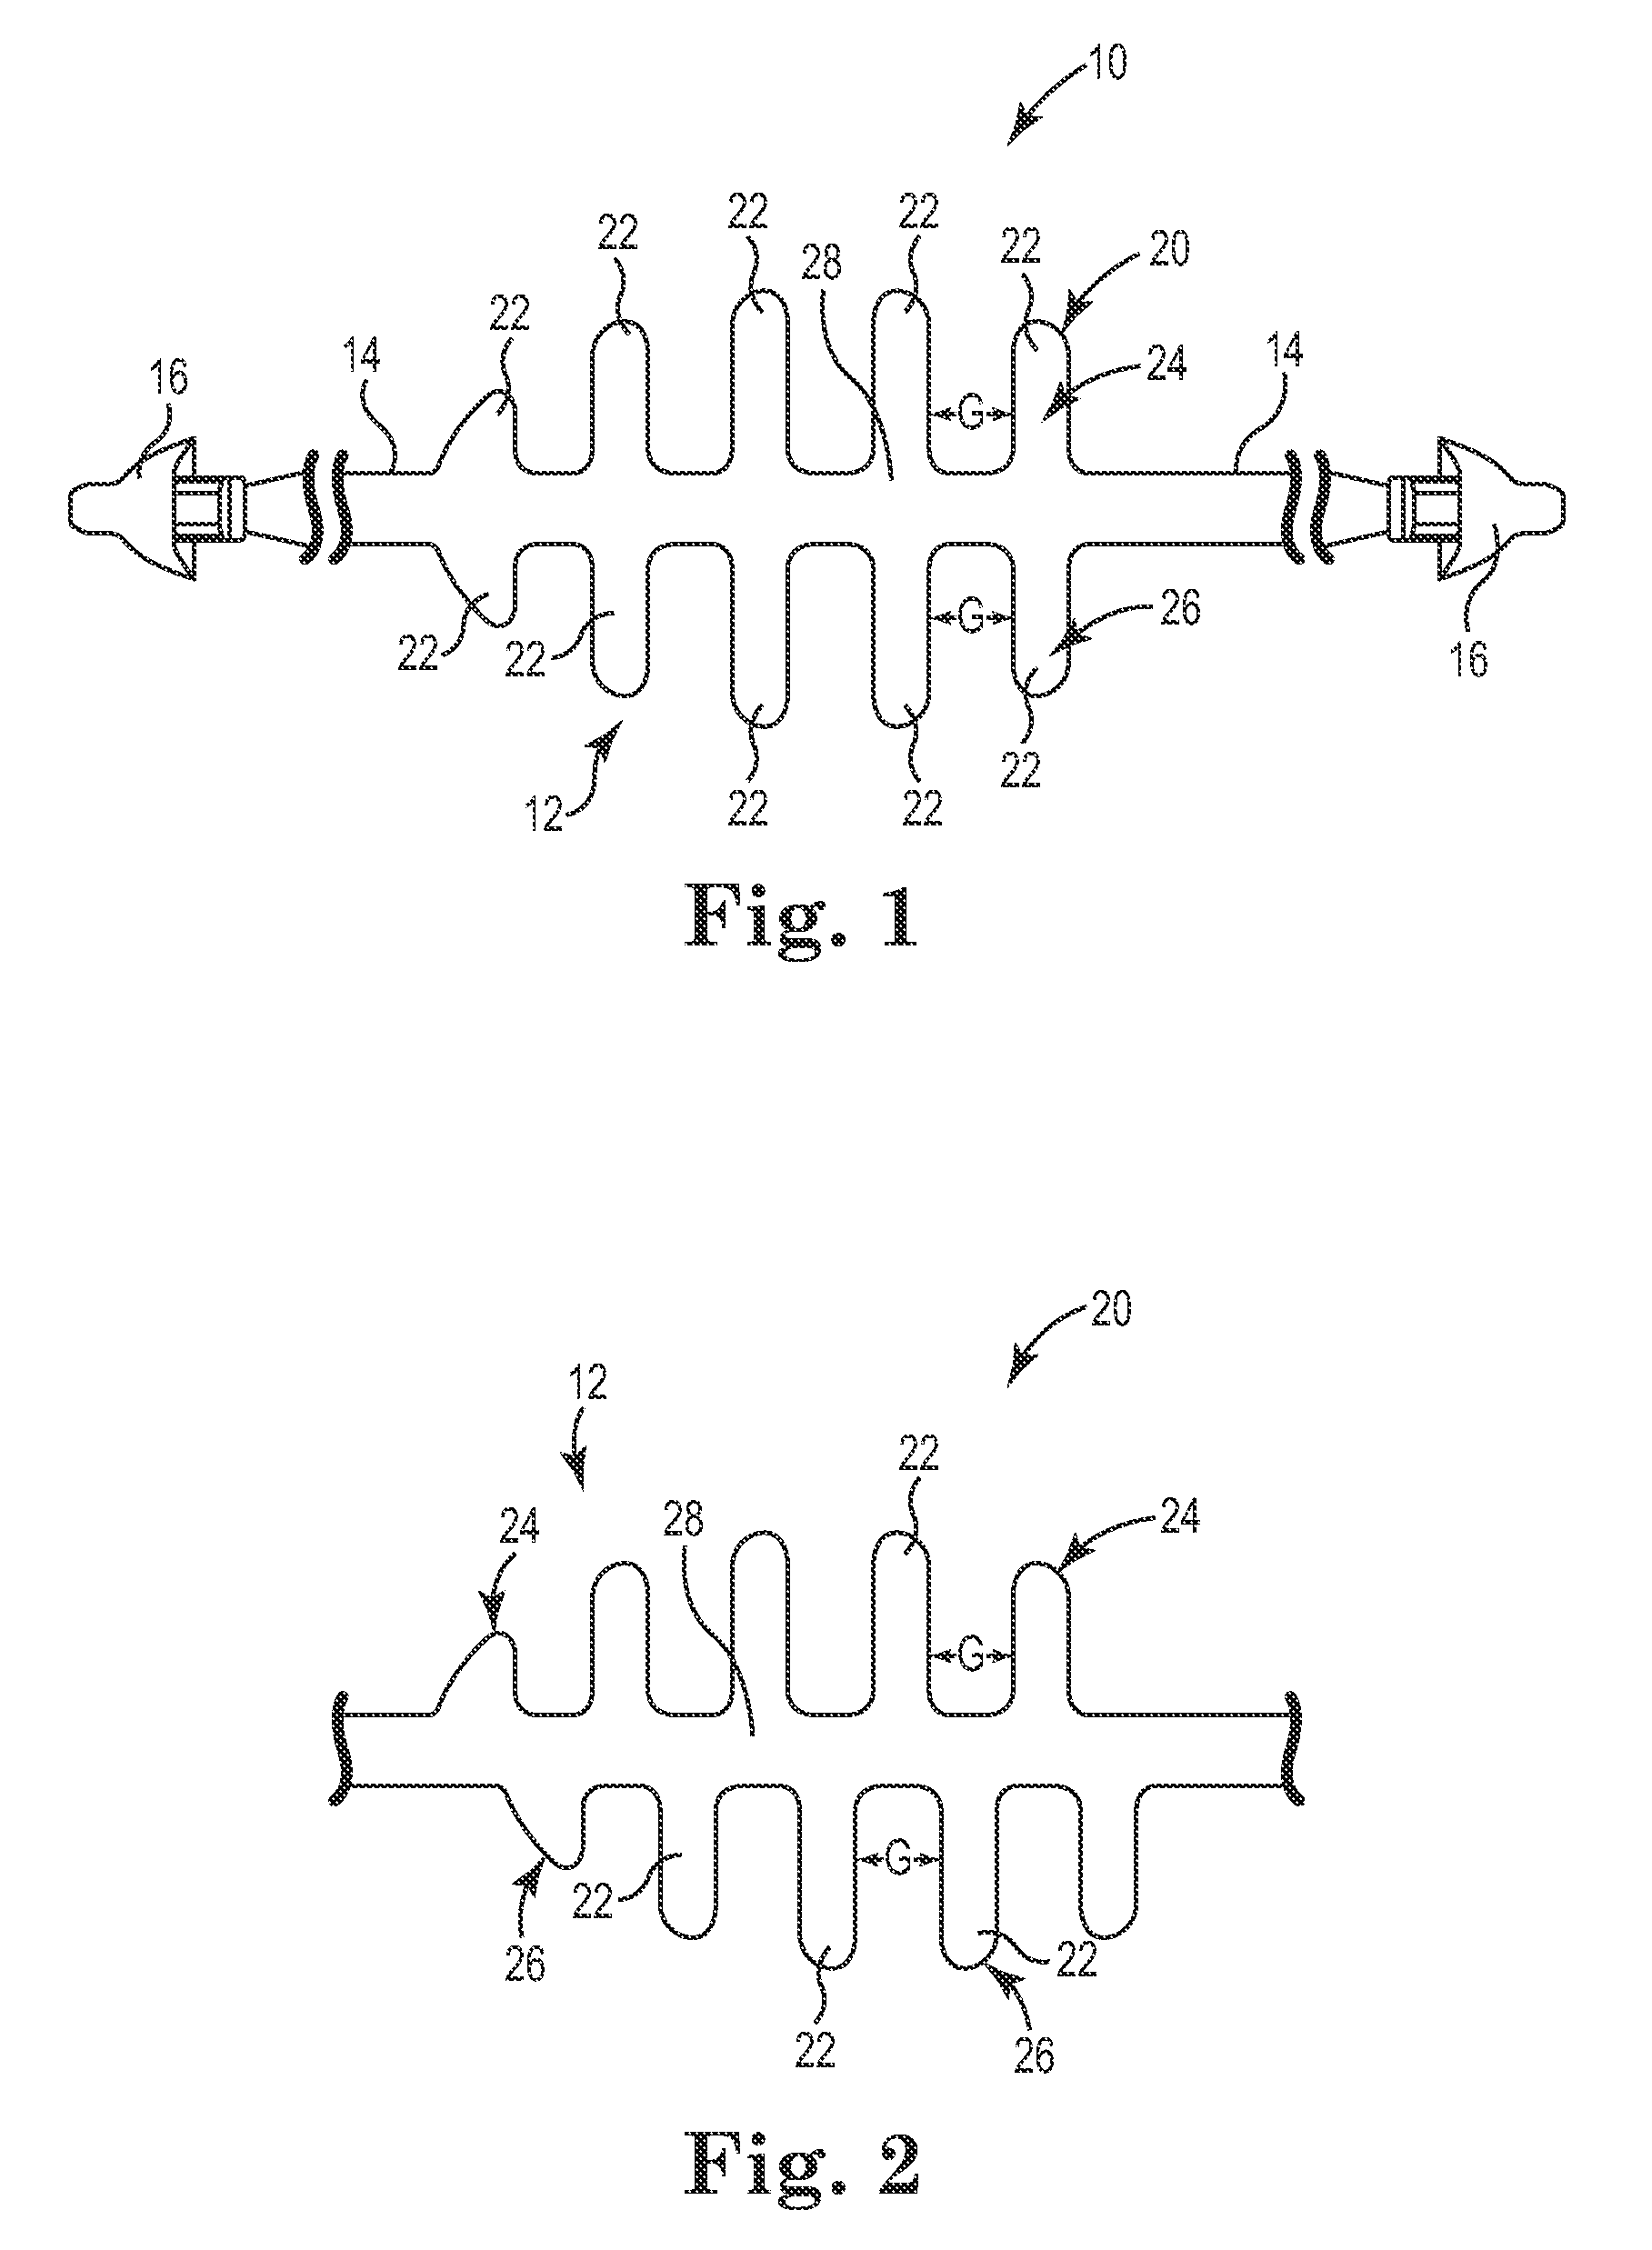 Fold-Resistant Pelvic Implant System and Method